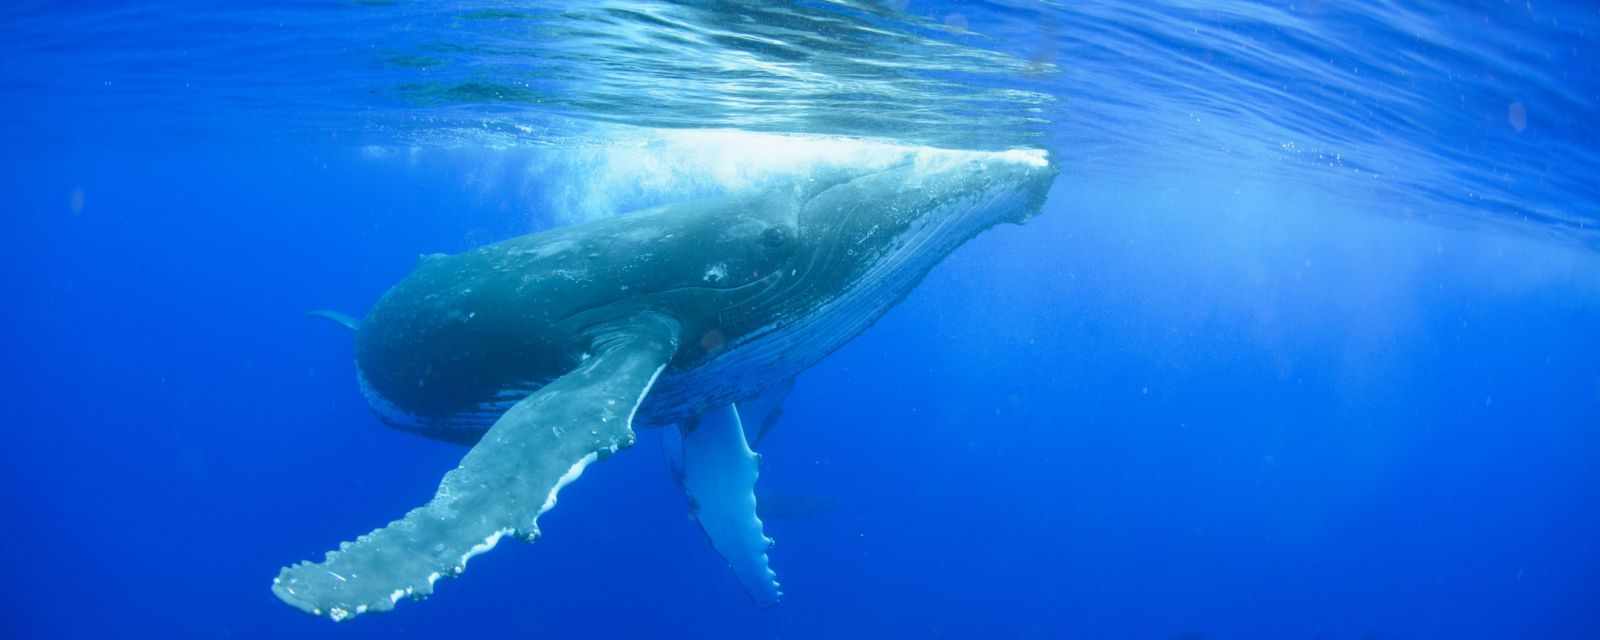 Swimming with Whales in Tonga - Tips and What to Experience